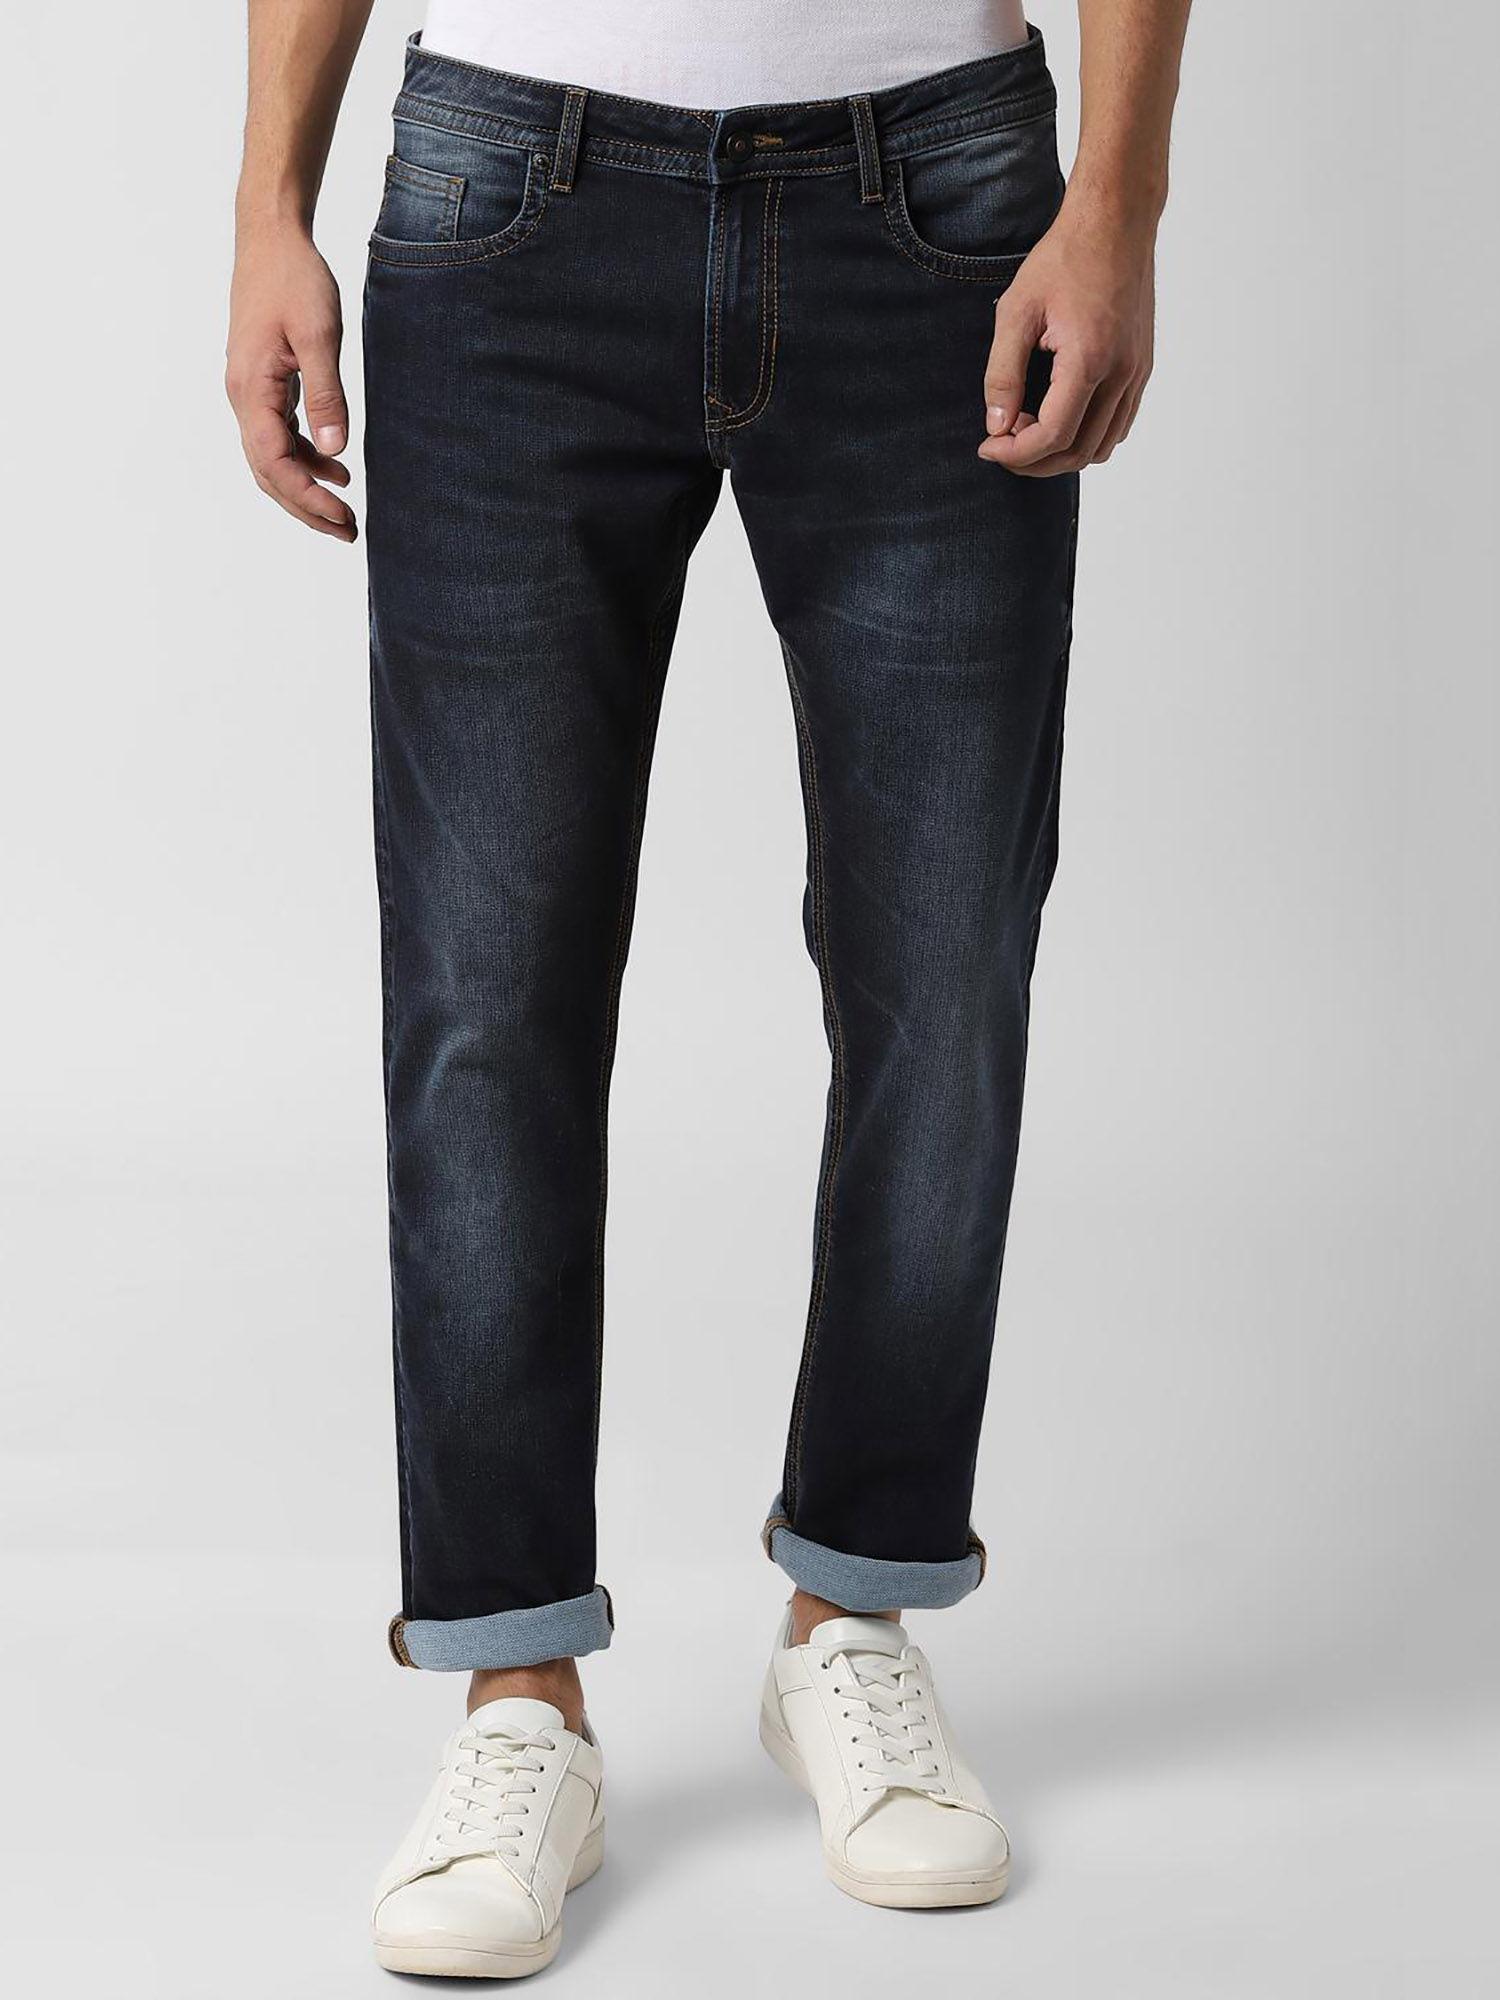 navy blue solid jeans